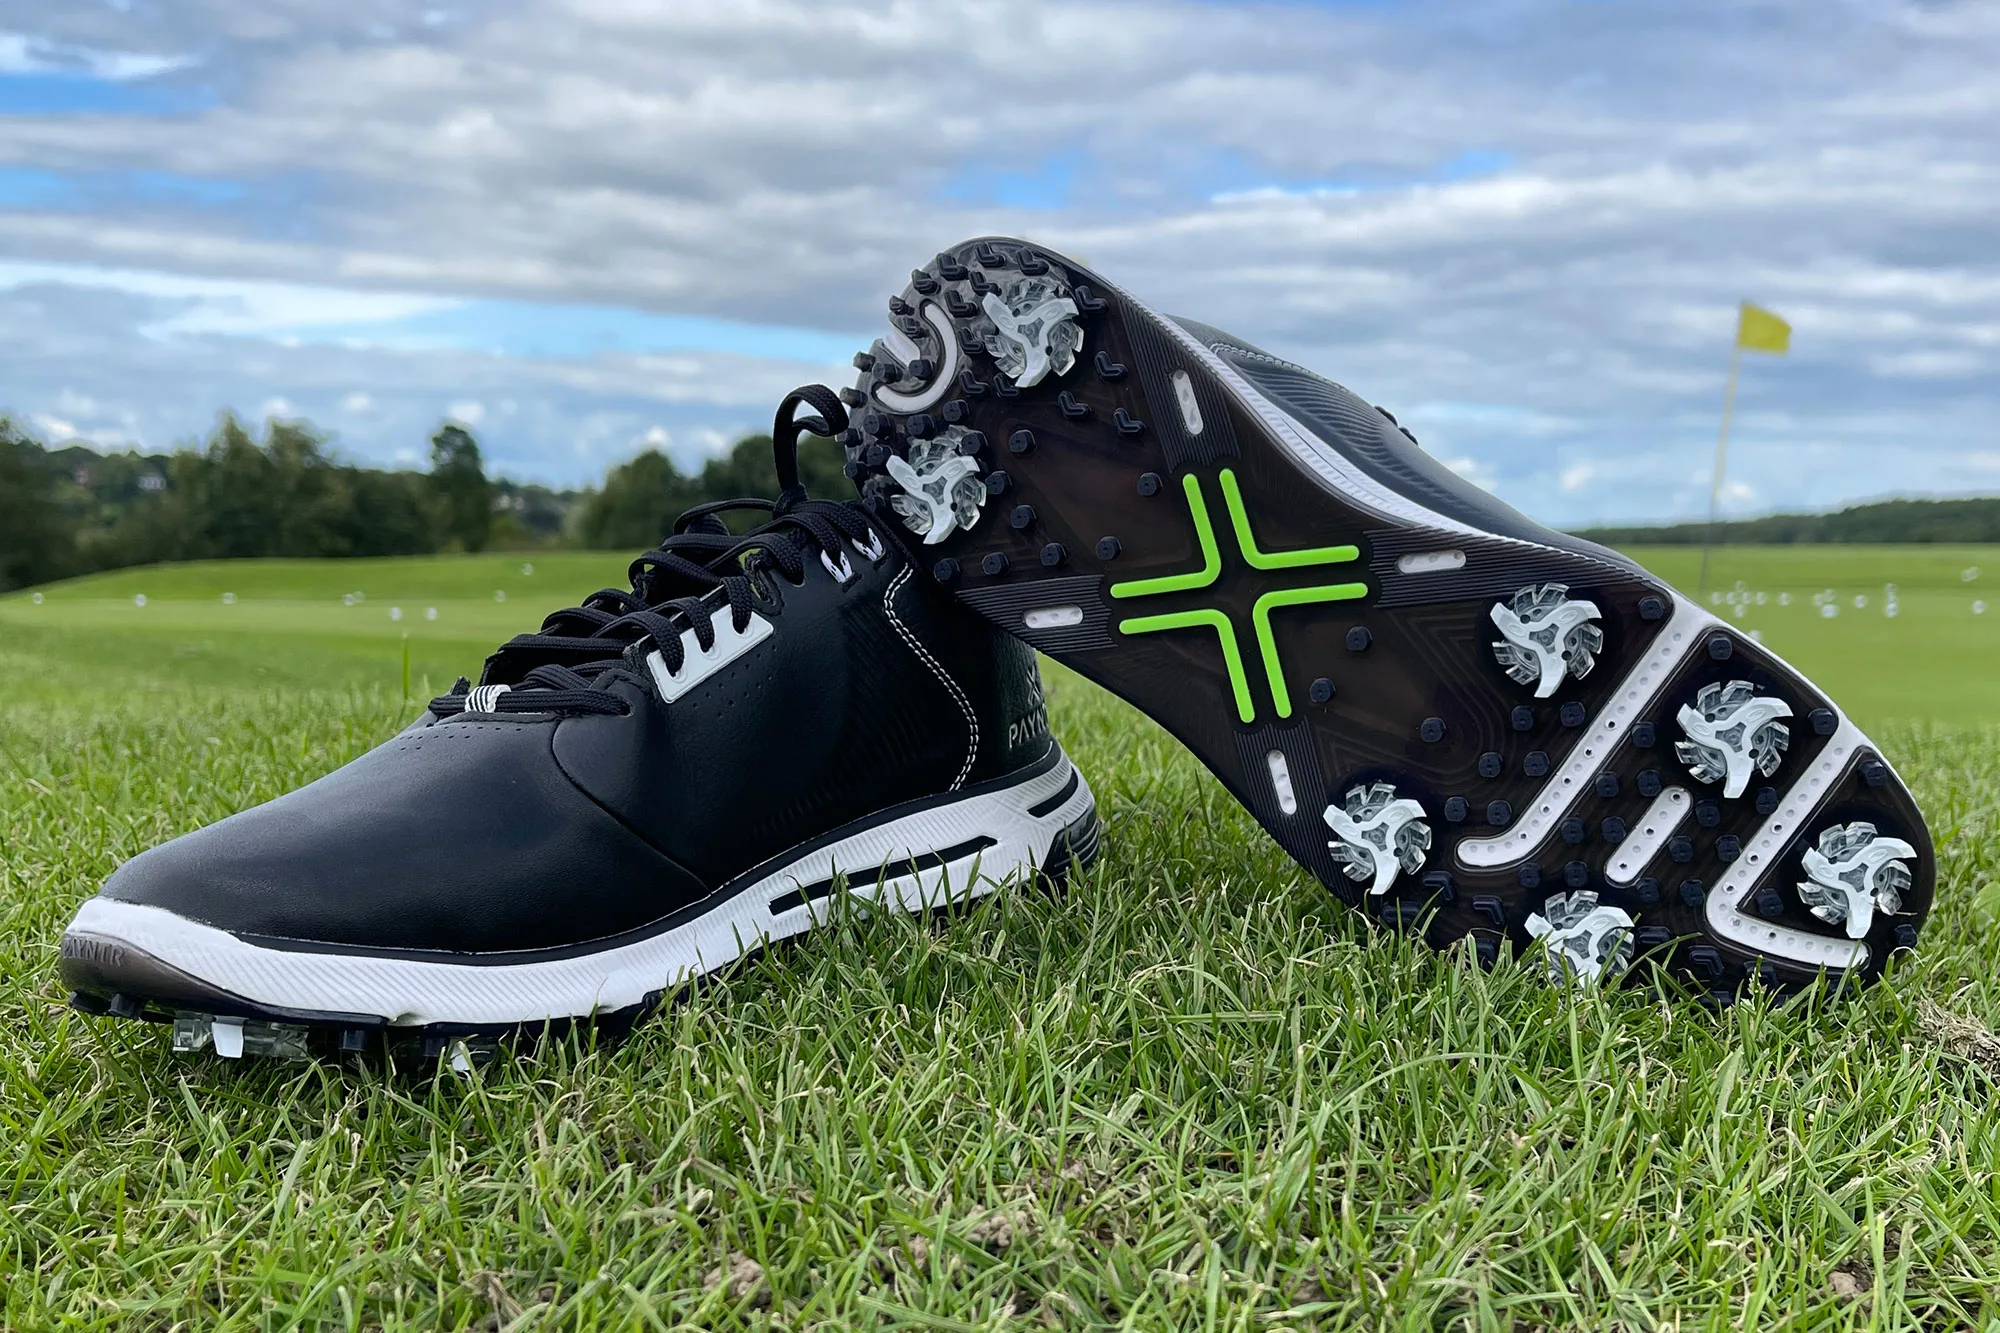 Payntr X 006 RS Spiked Golf Shoes Review